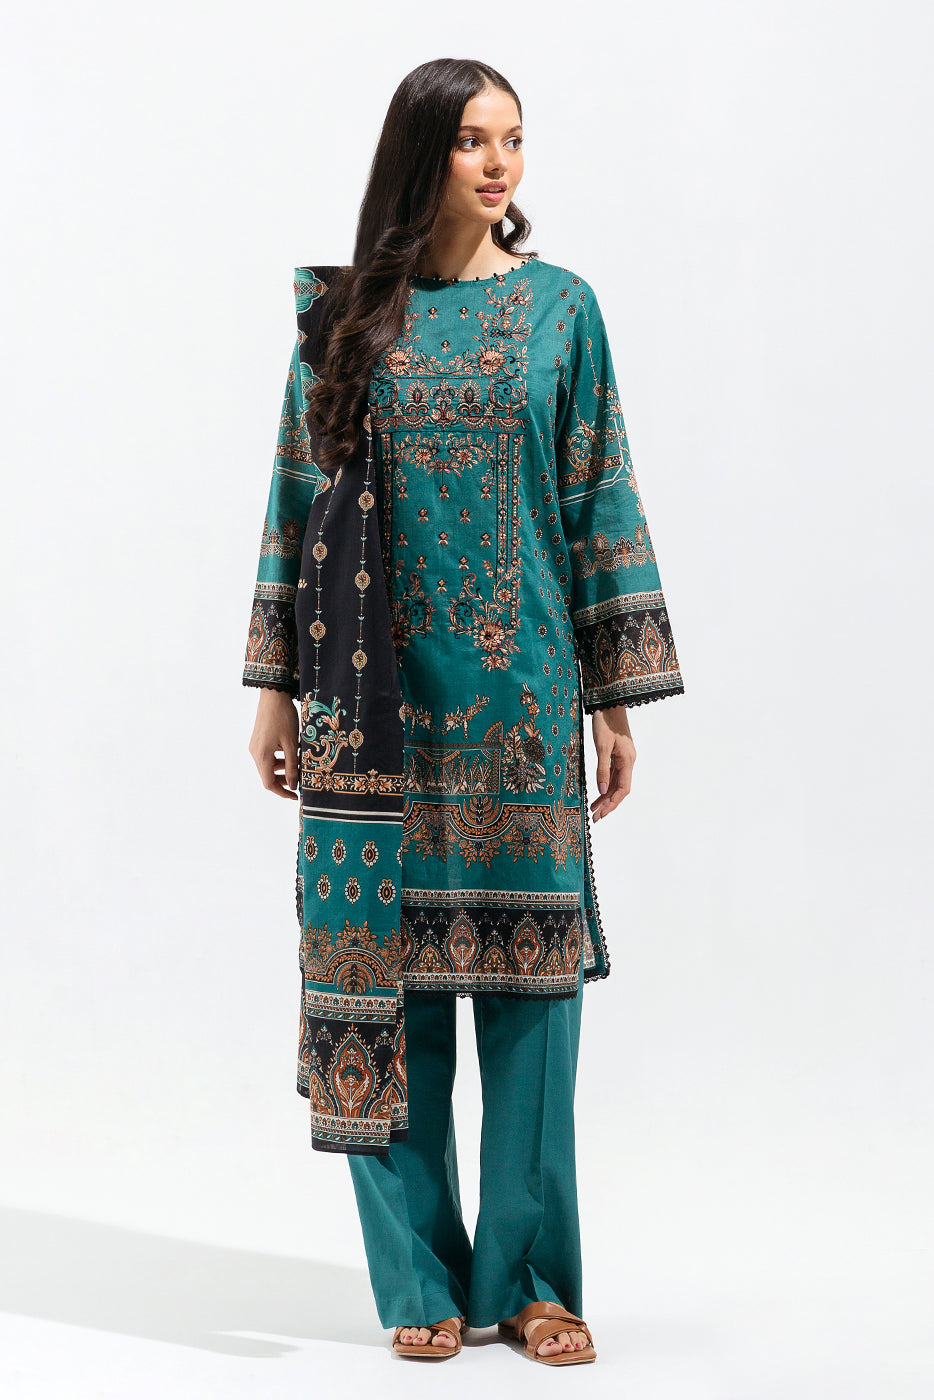 2 PIECE - EMBROIDERED LAWN SUIT - CAROLINA GRACE (UNSTITCHED) - BEECHTREE